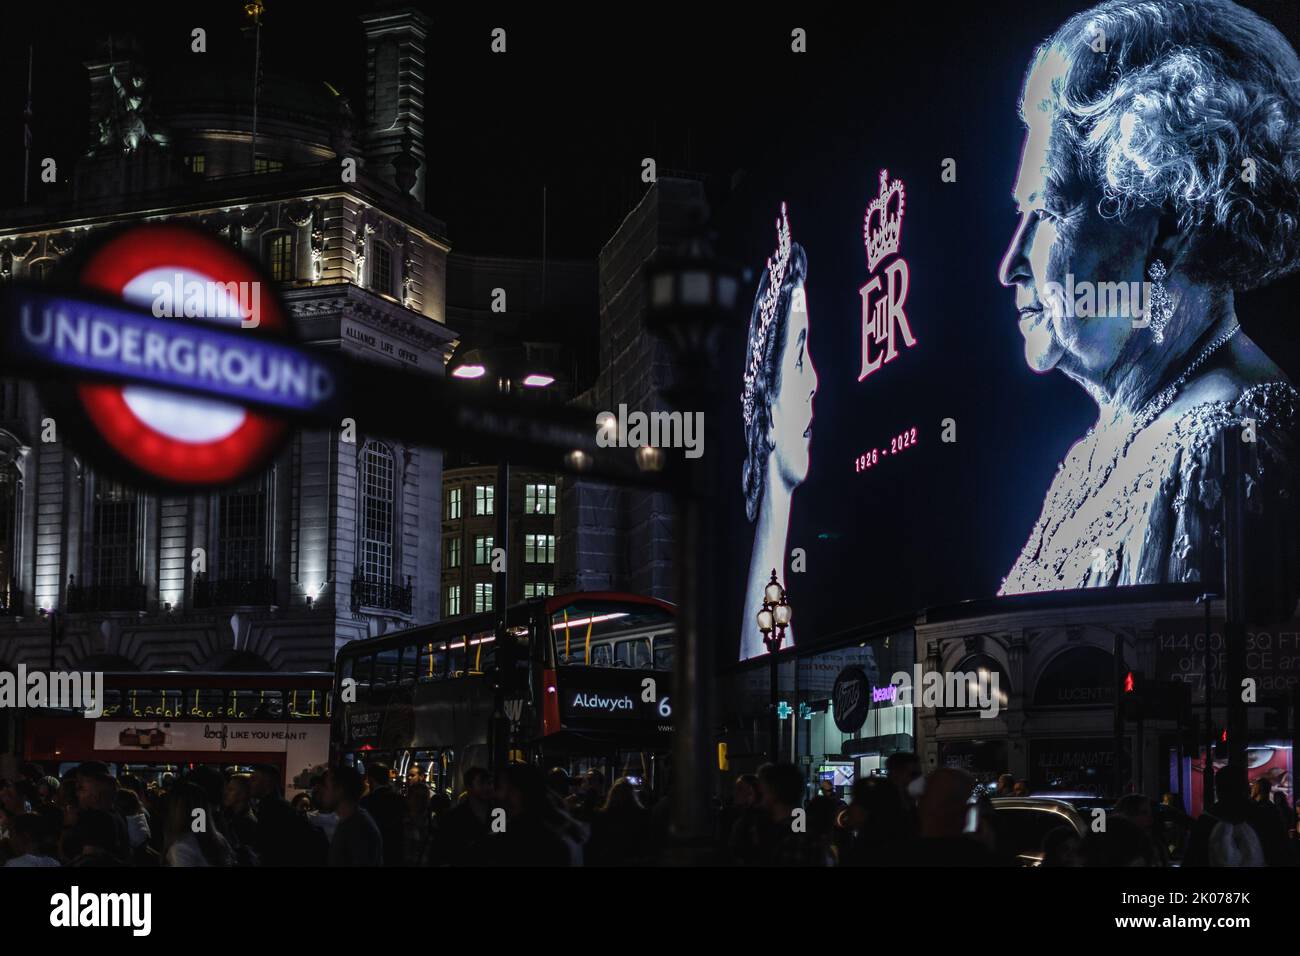 Tribute to Queen Elizabeth II on the giant billboard in Piccadilly Circus following her death 8 September 2022. Stock Photo